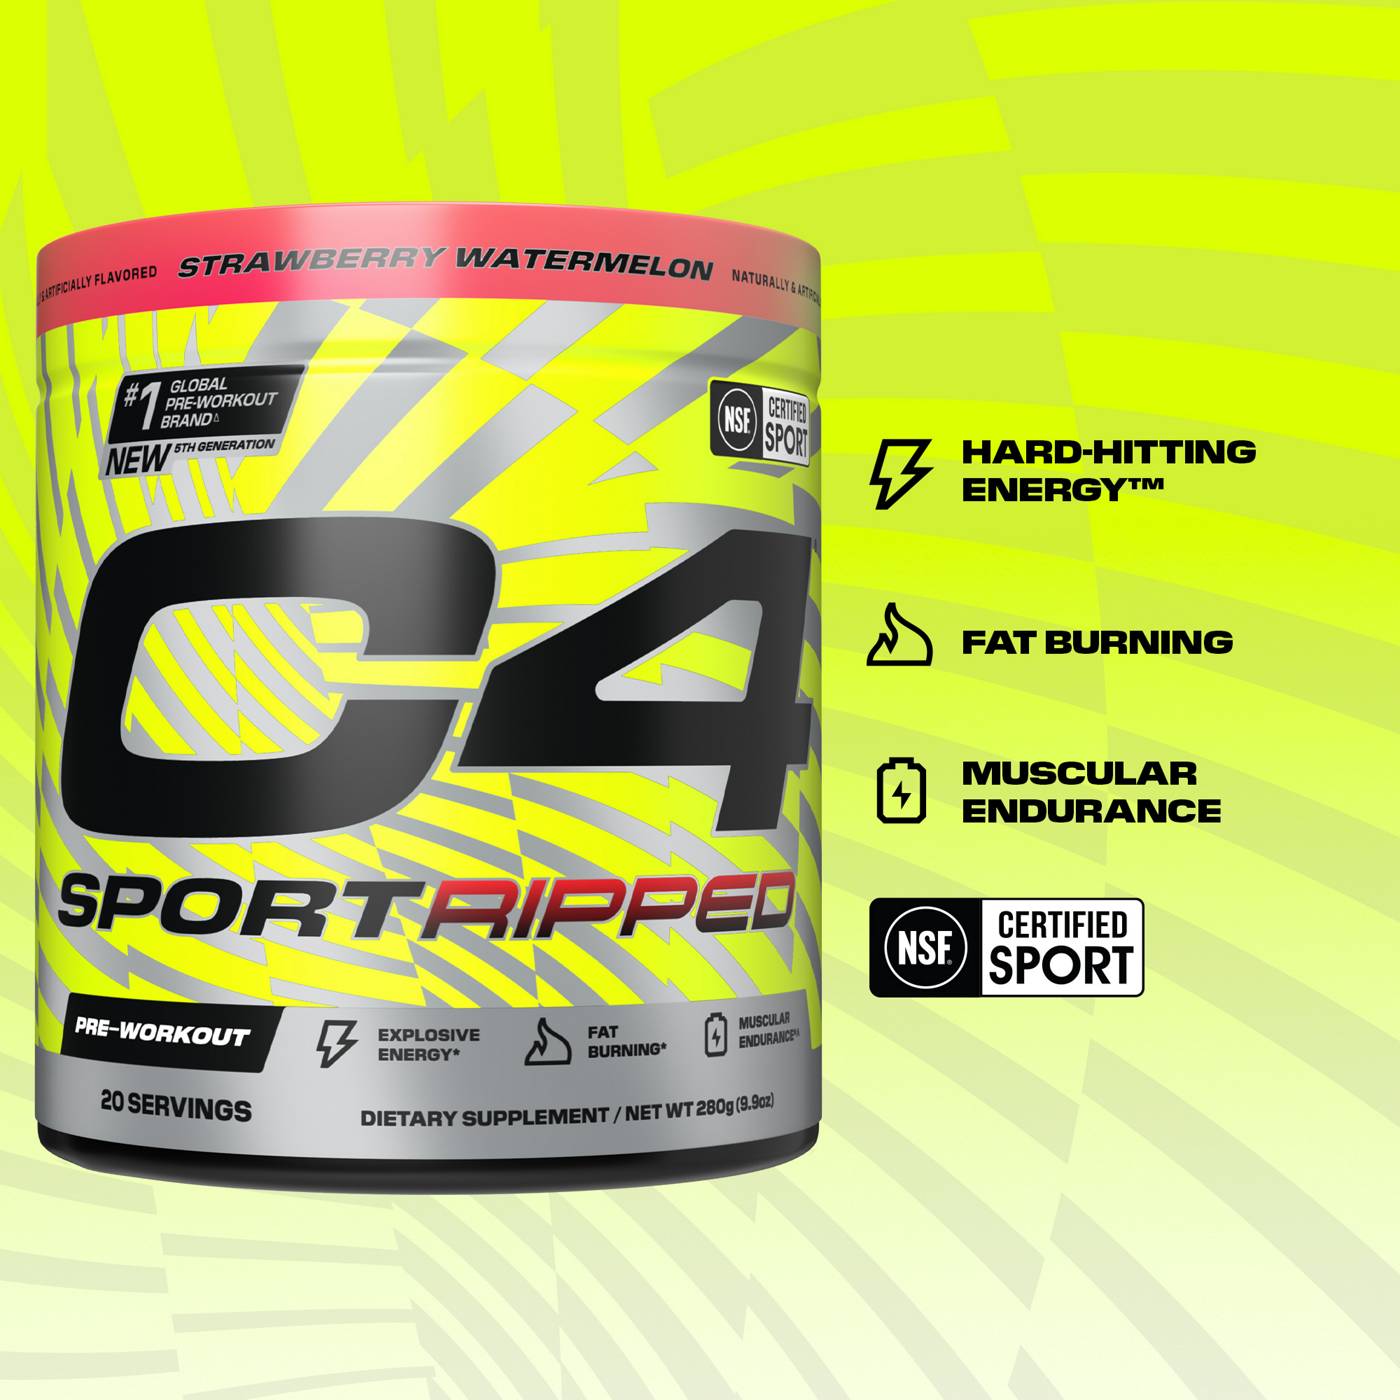 Cellucor C4 Sport Pre-Workout - Ripped Strawberry Watermelon; image 4 of 8